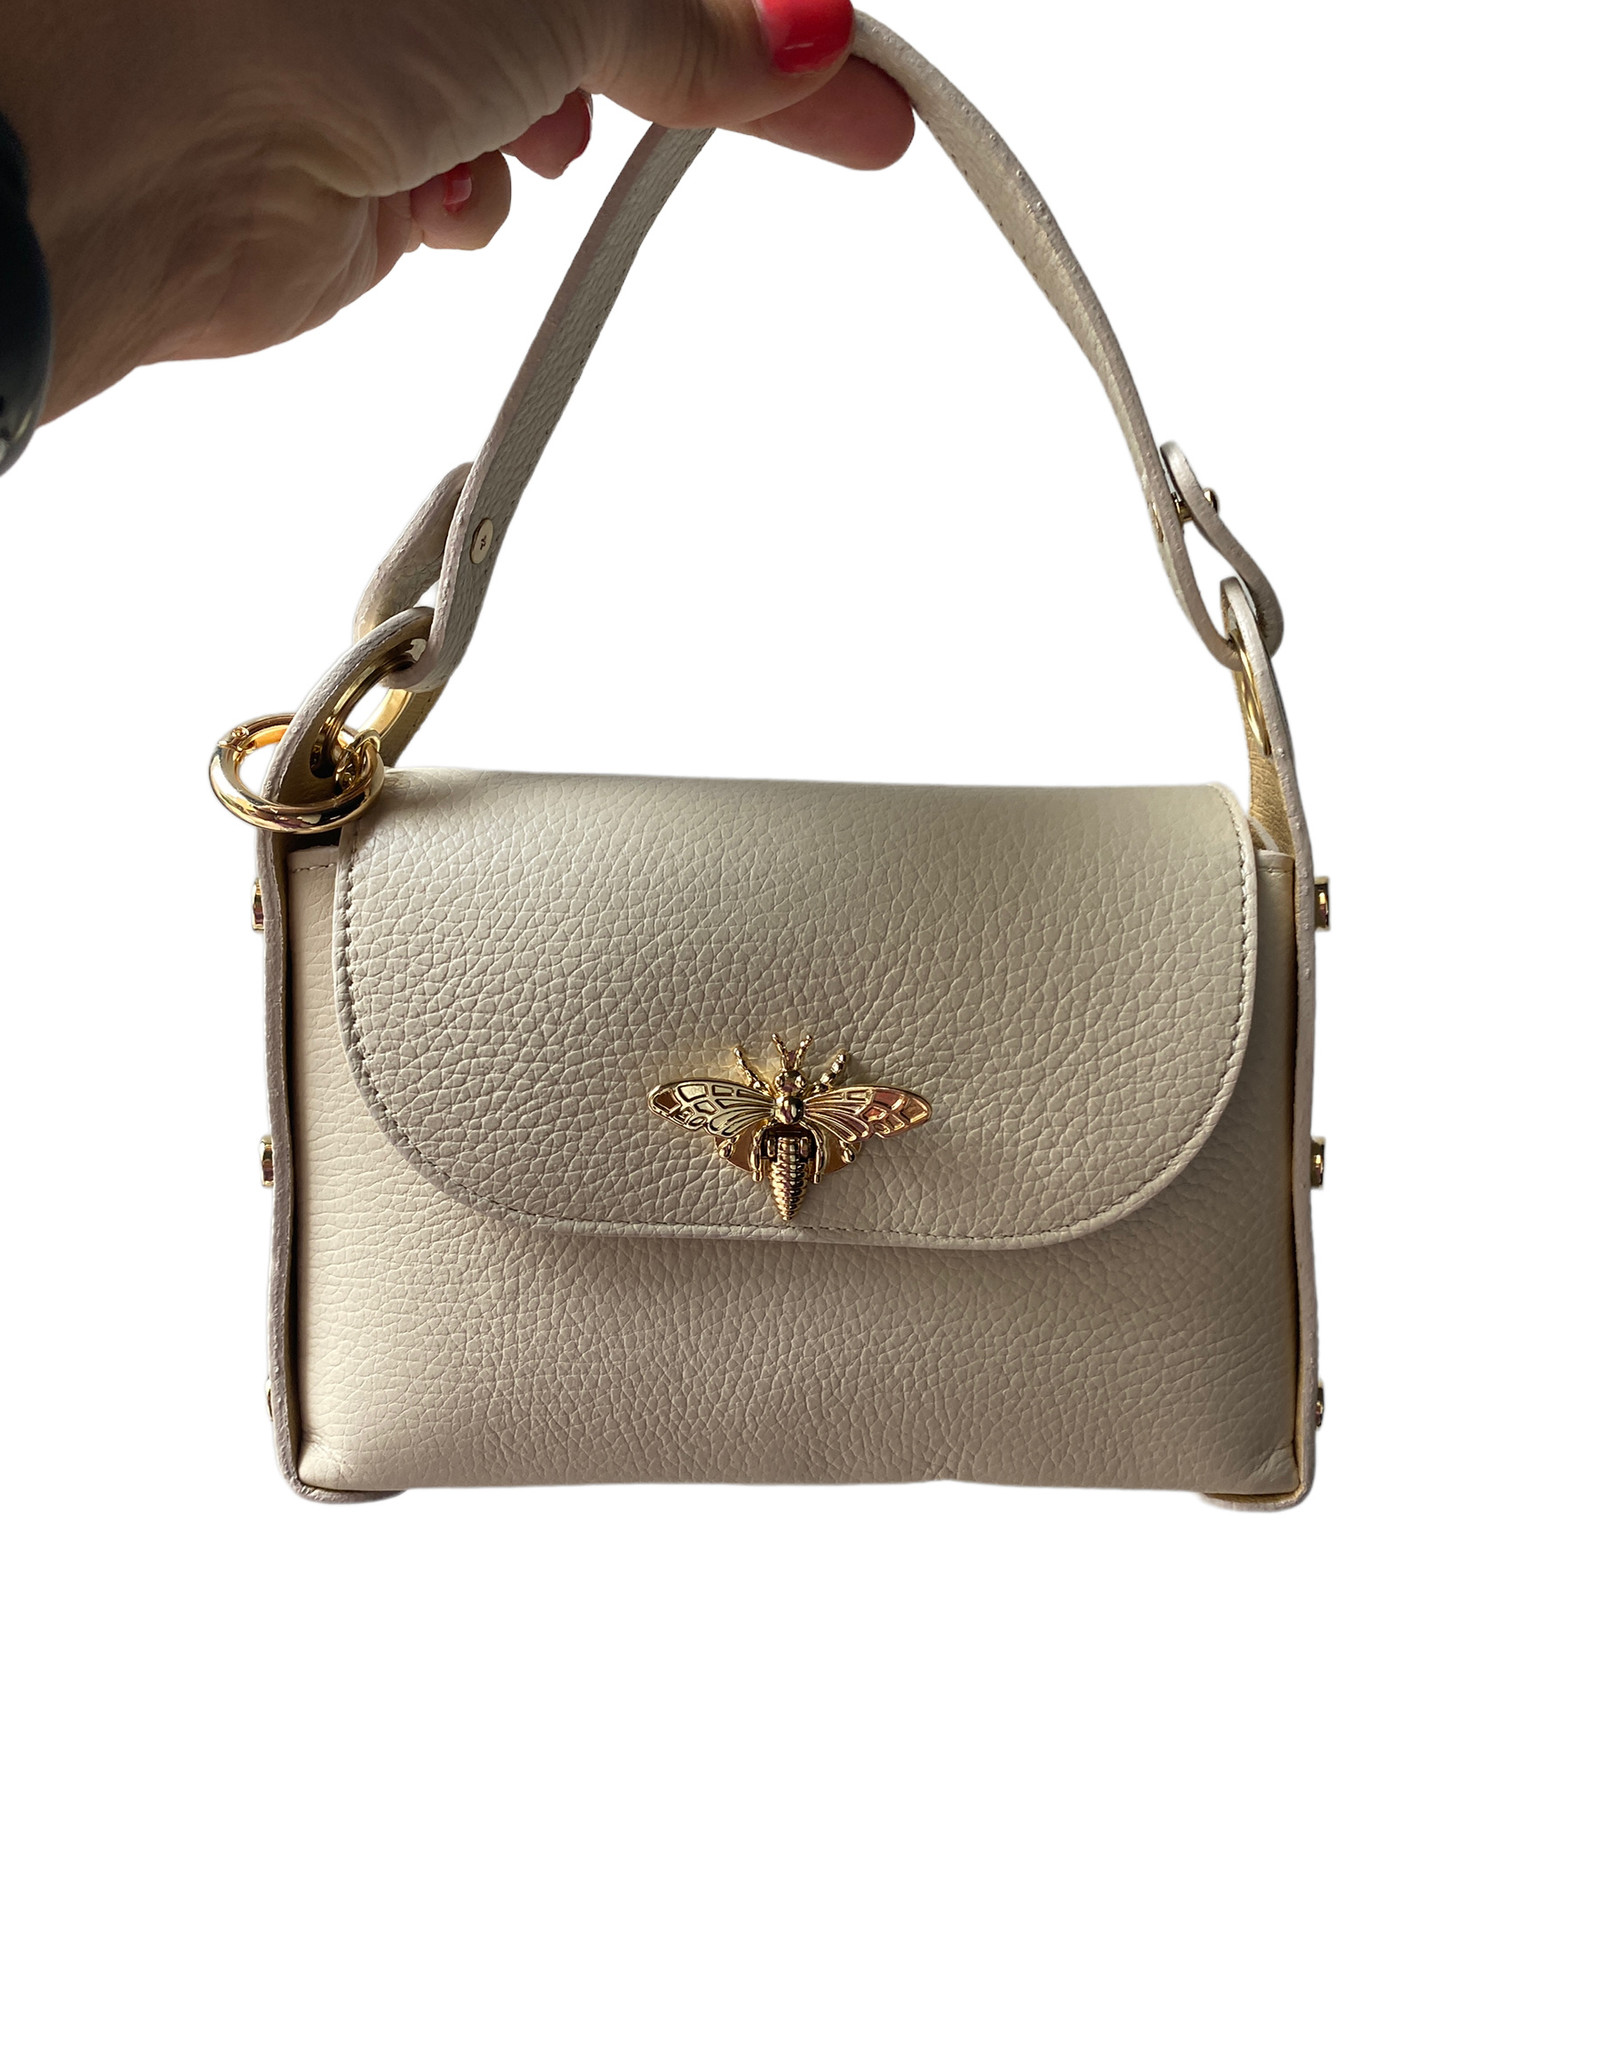 Little small bag with studs at the side en butterfly as buttom in front.  With handle en long remouvable chain shoulderbelt